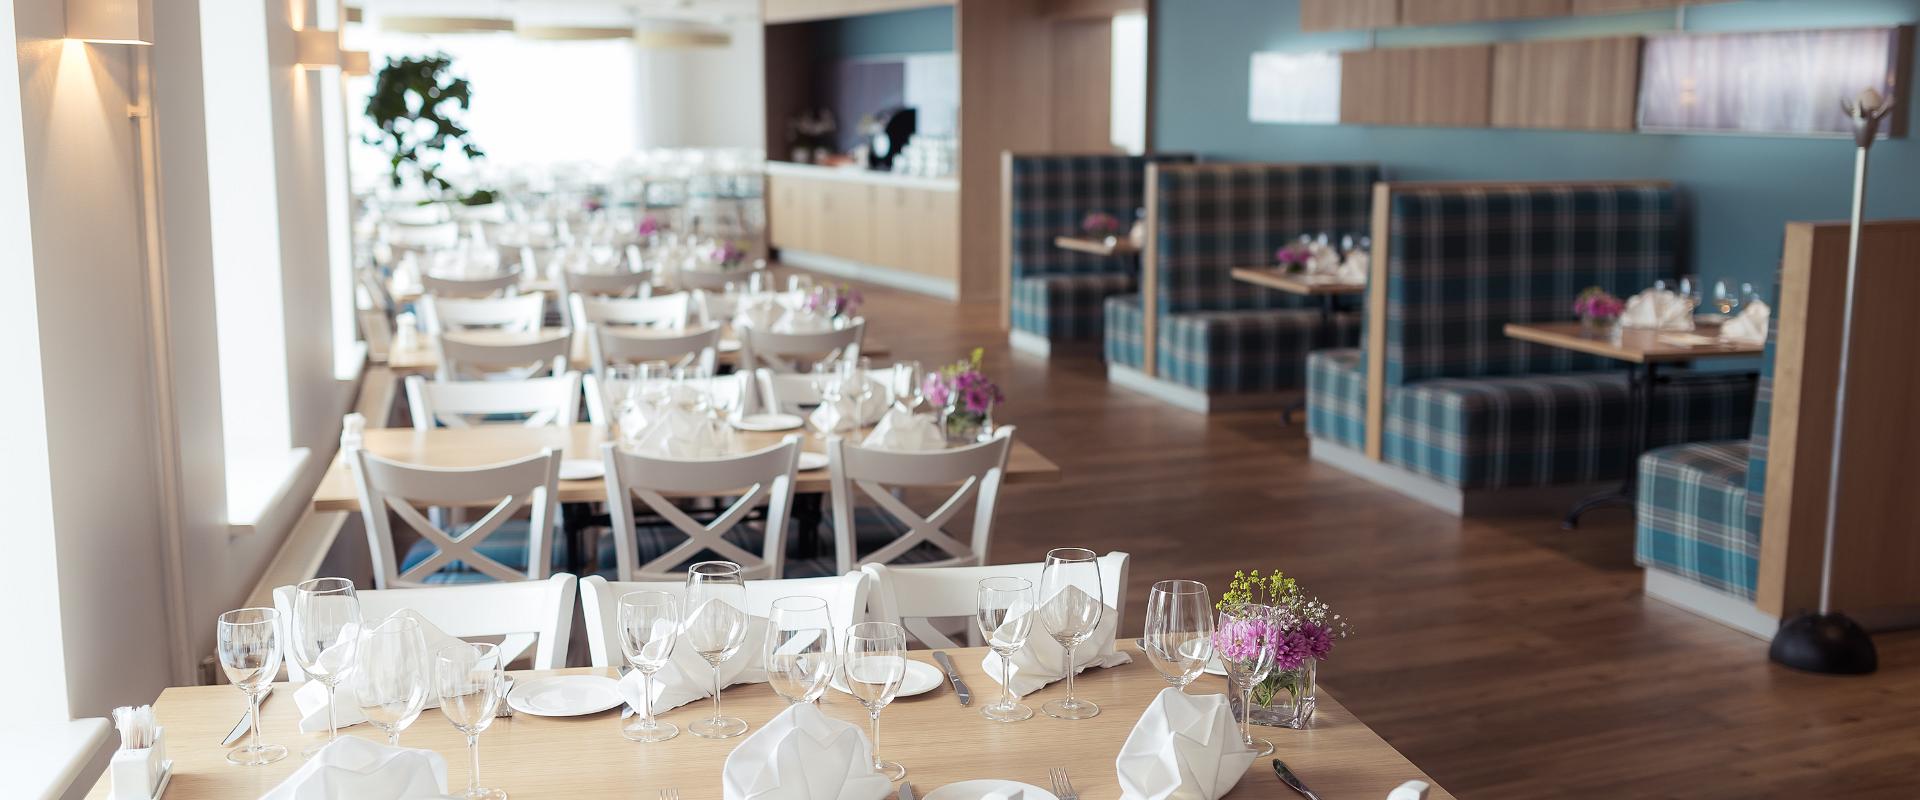 Hestia Hotel Strand has an 80-seat à la carte restaurant with a variety of European cuisines, where natural and healthy ingredients offer plenty of ch